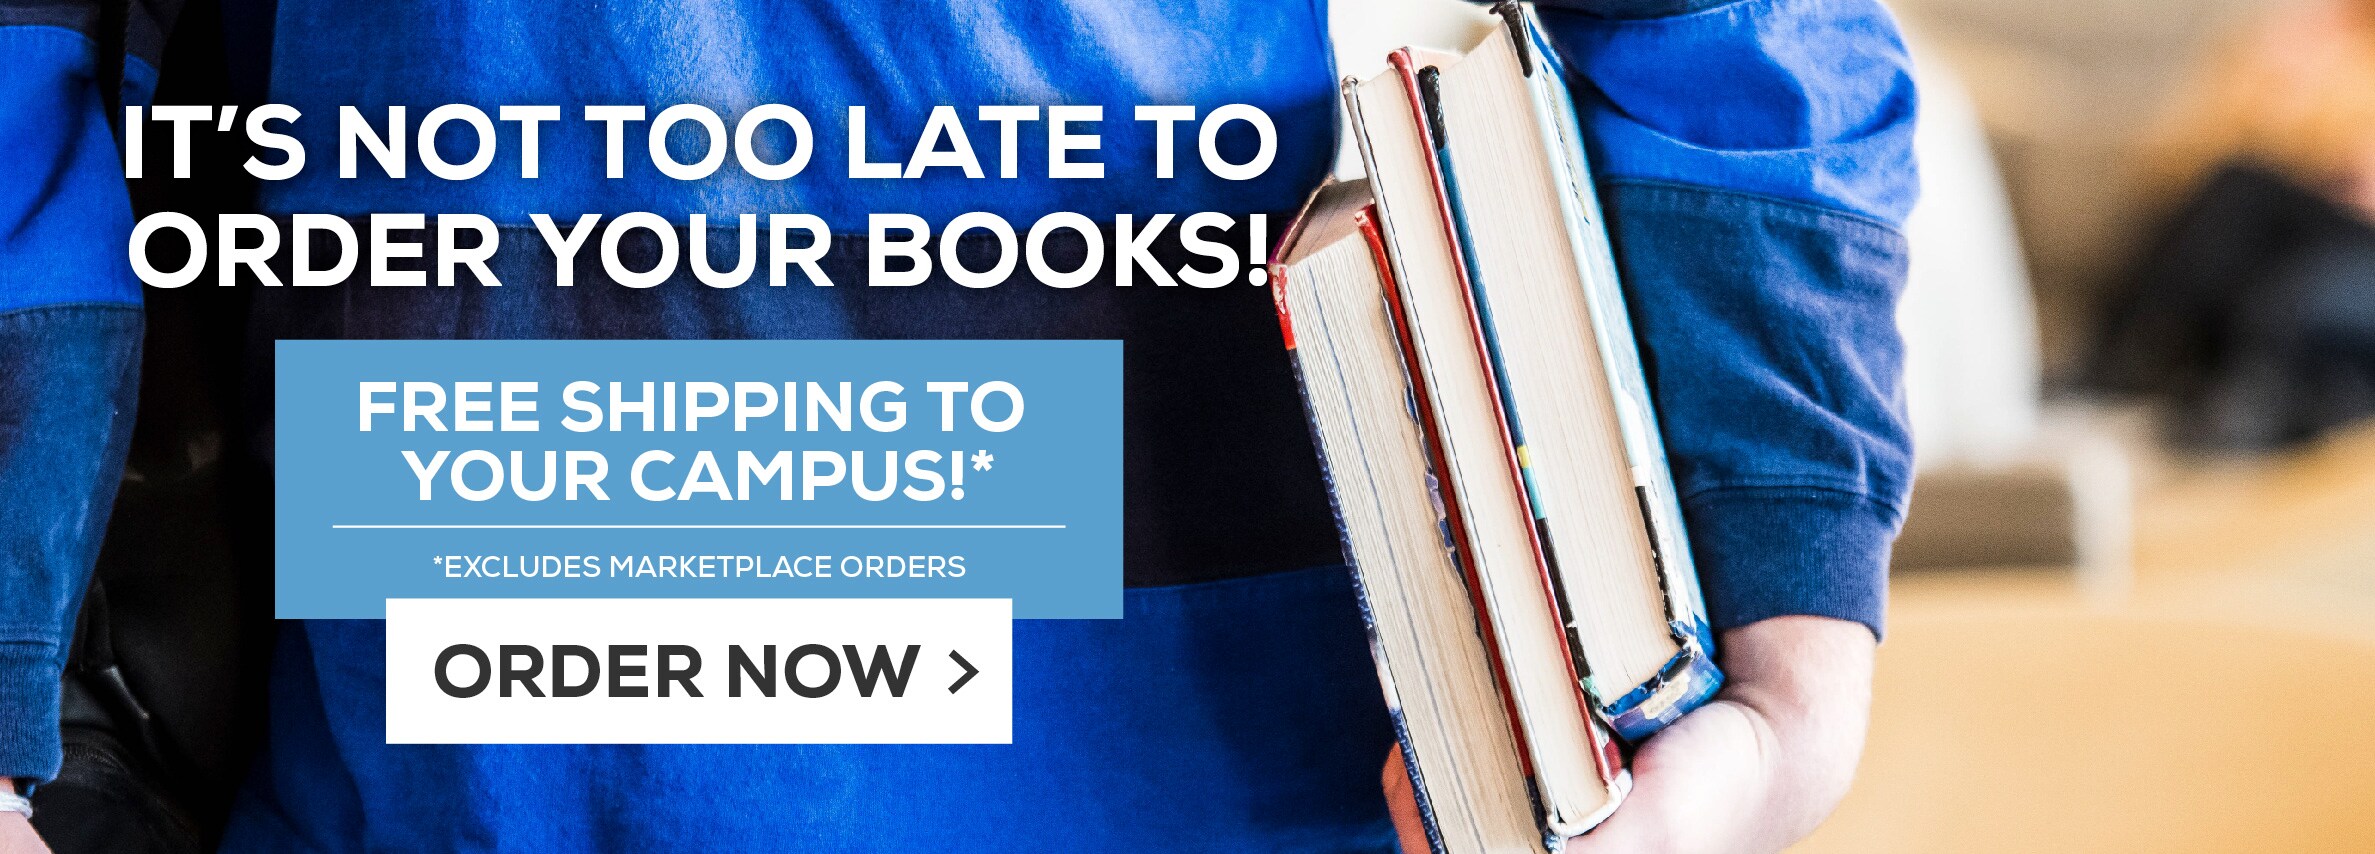 Itâ€™s not too late to order your books! Free shipping to your campus!* Excludes marketplace purchases. Order Now.